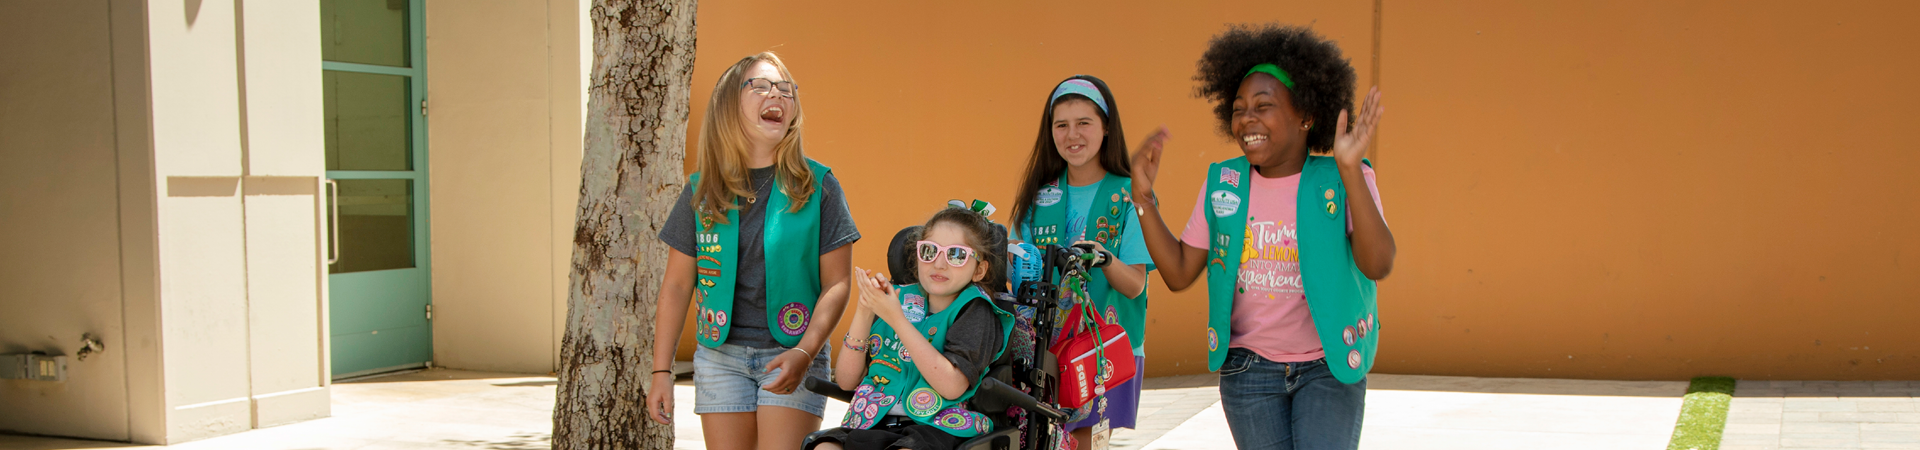  A group of Junior Girl Scouts laughing and smiling 